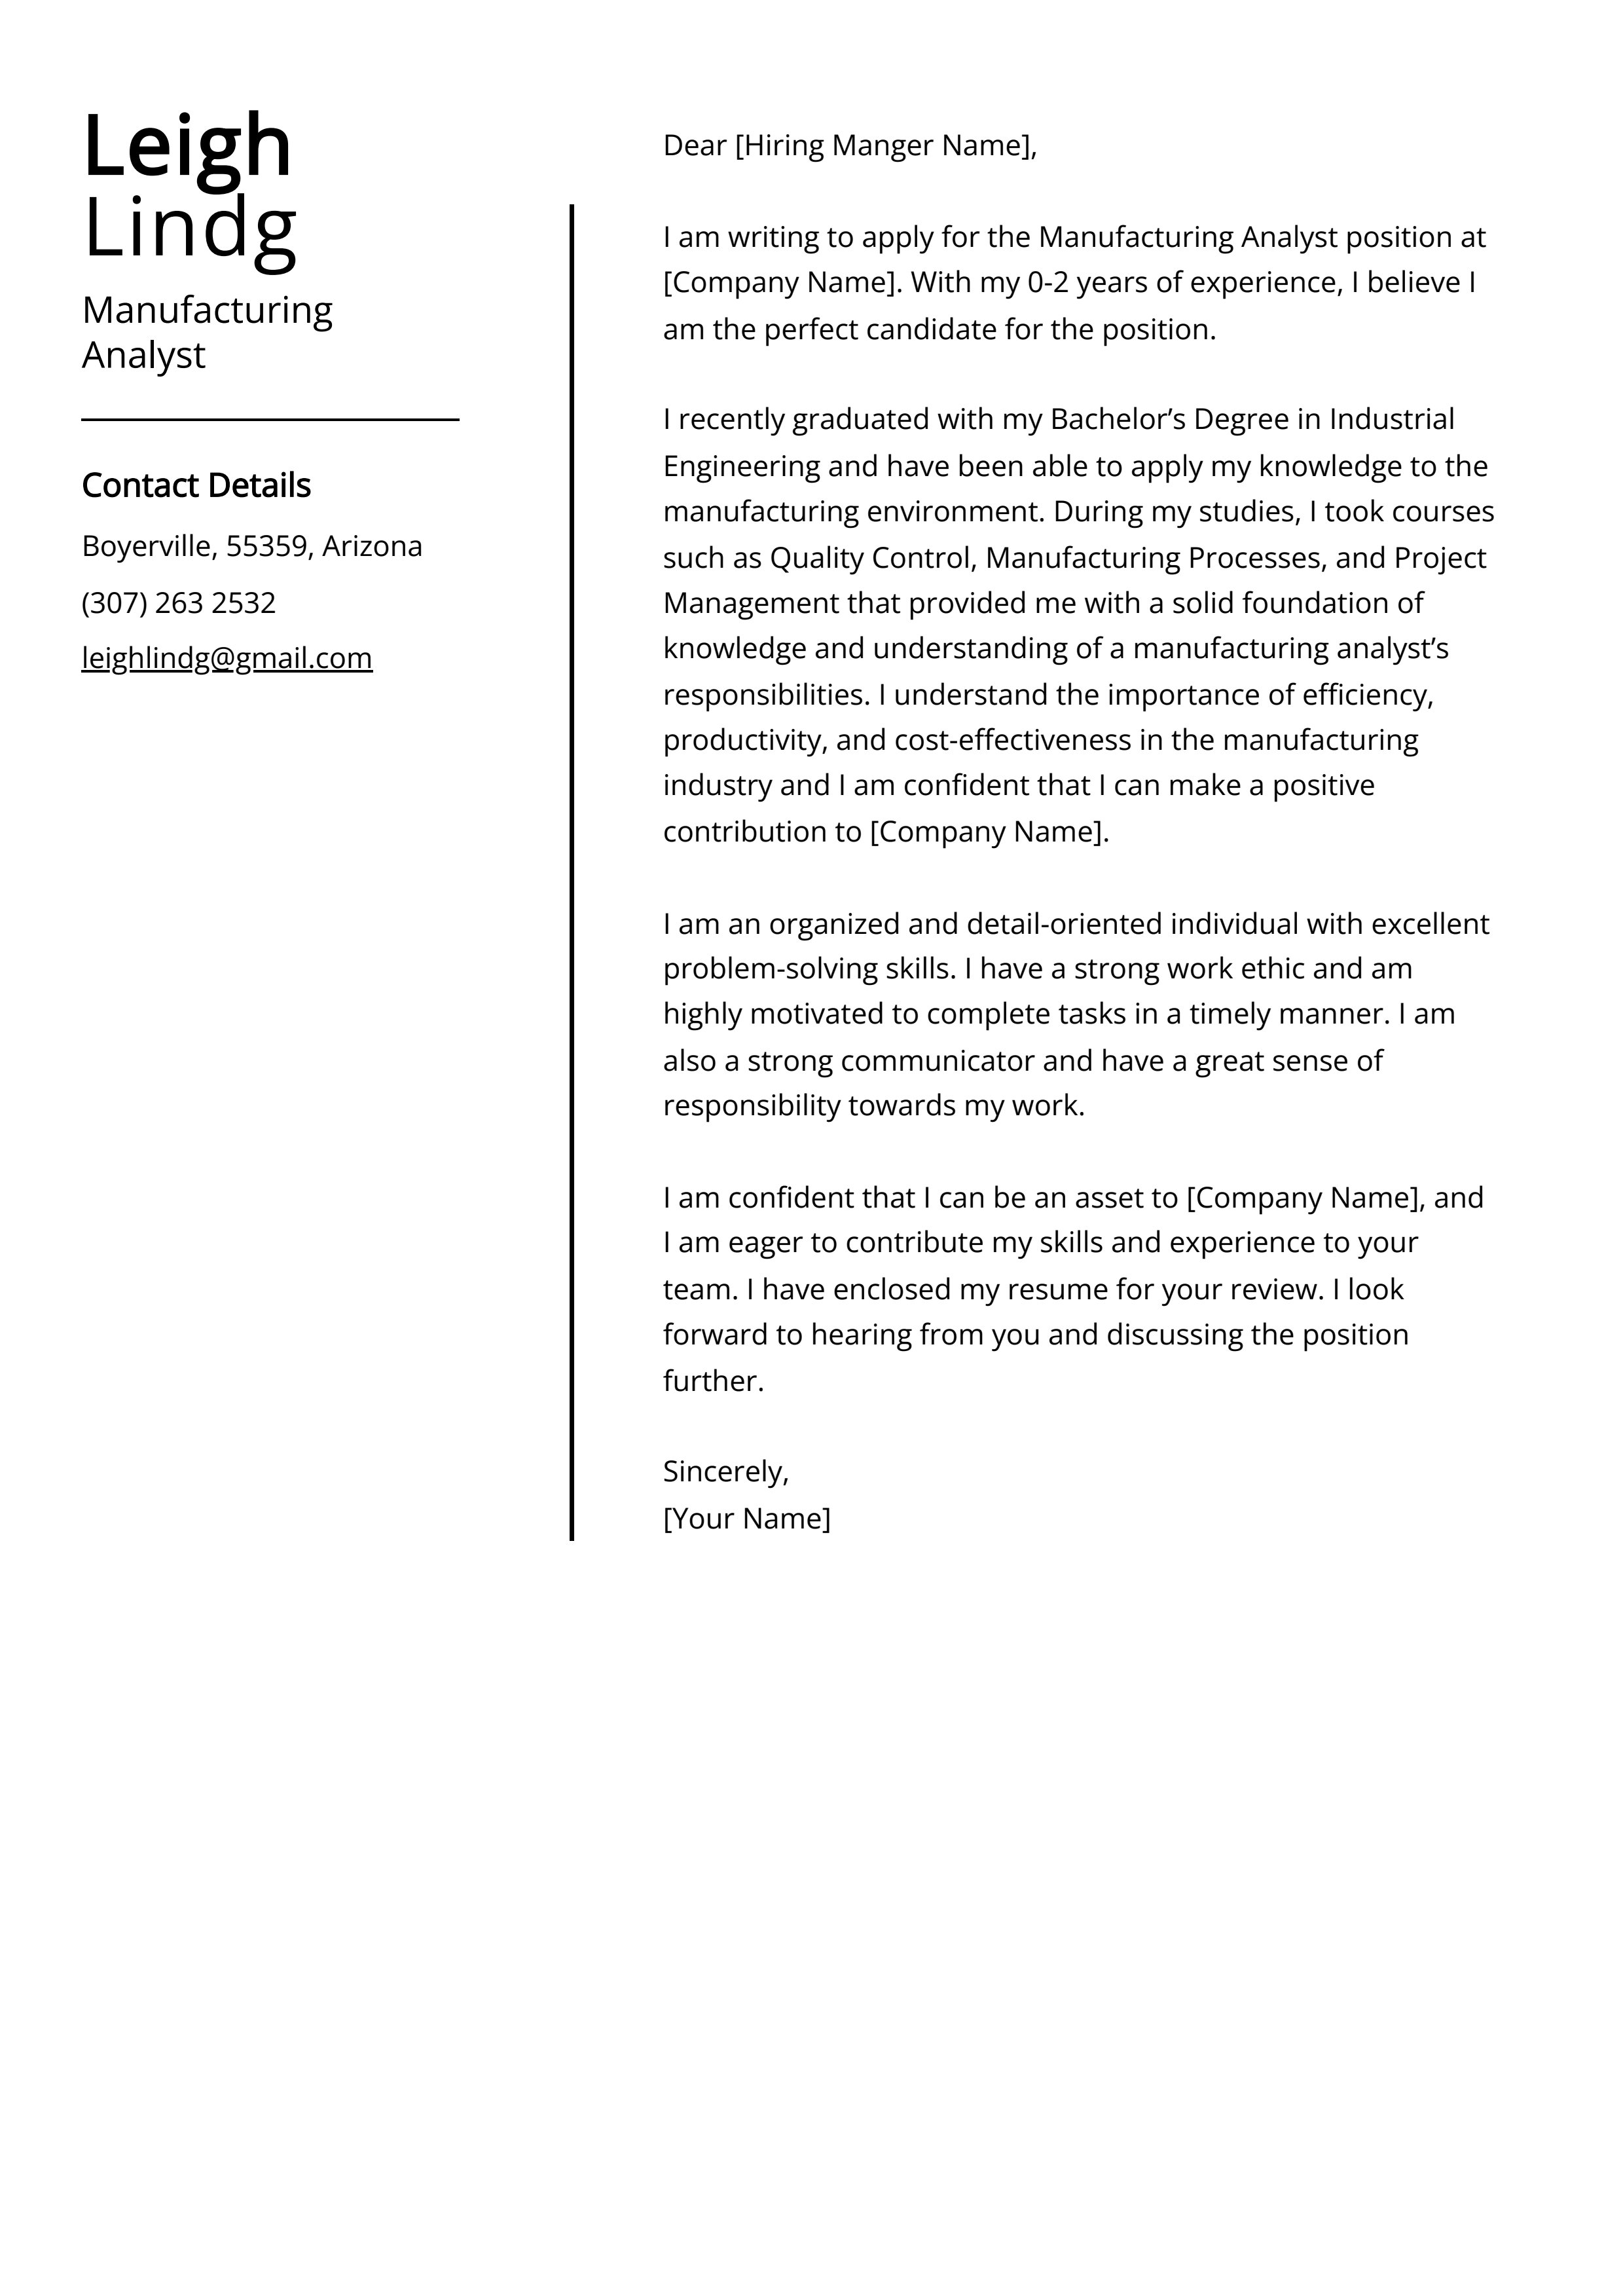 Manufacturing Analyst Cover Letter Example